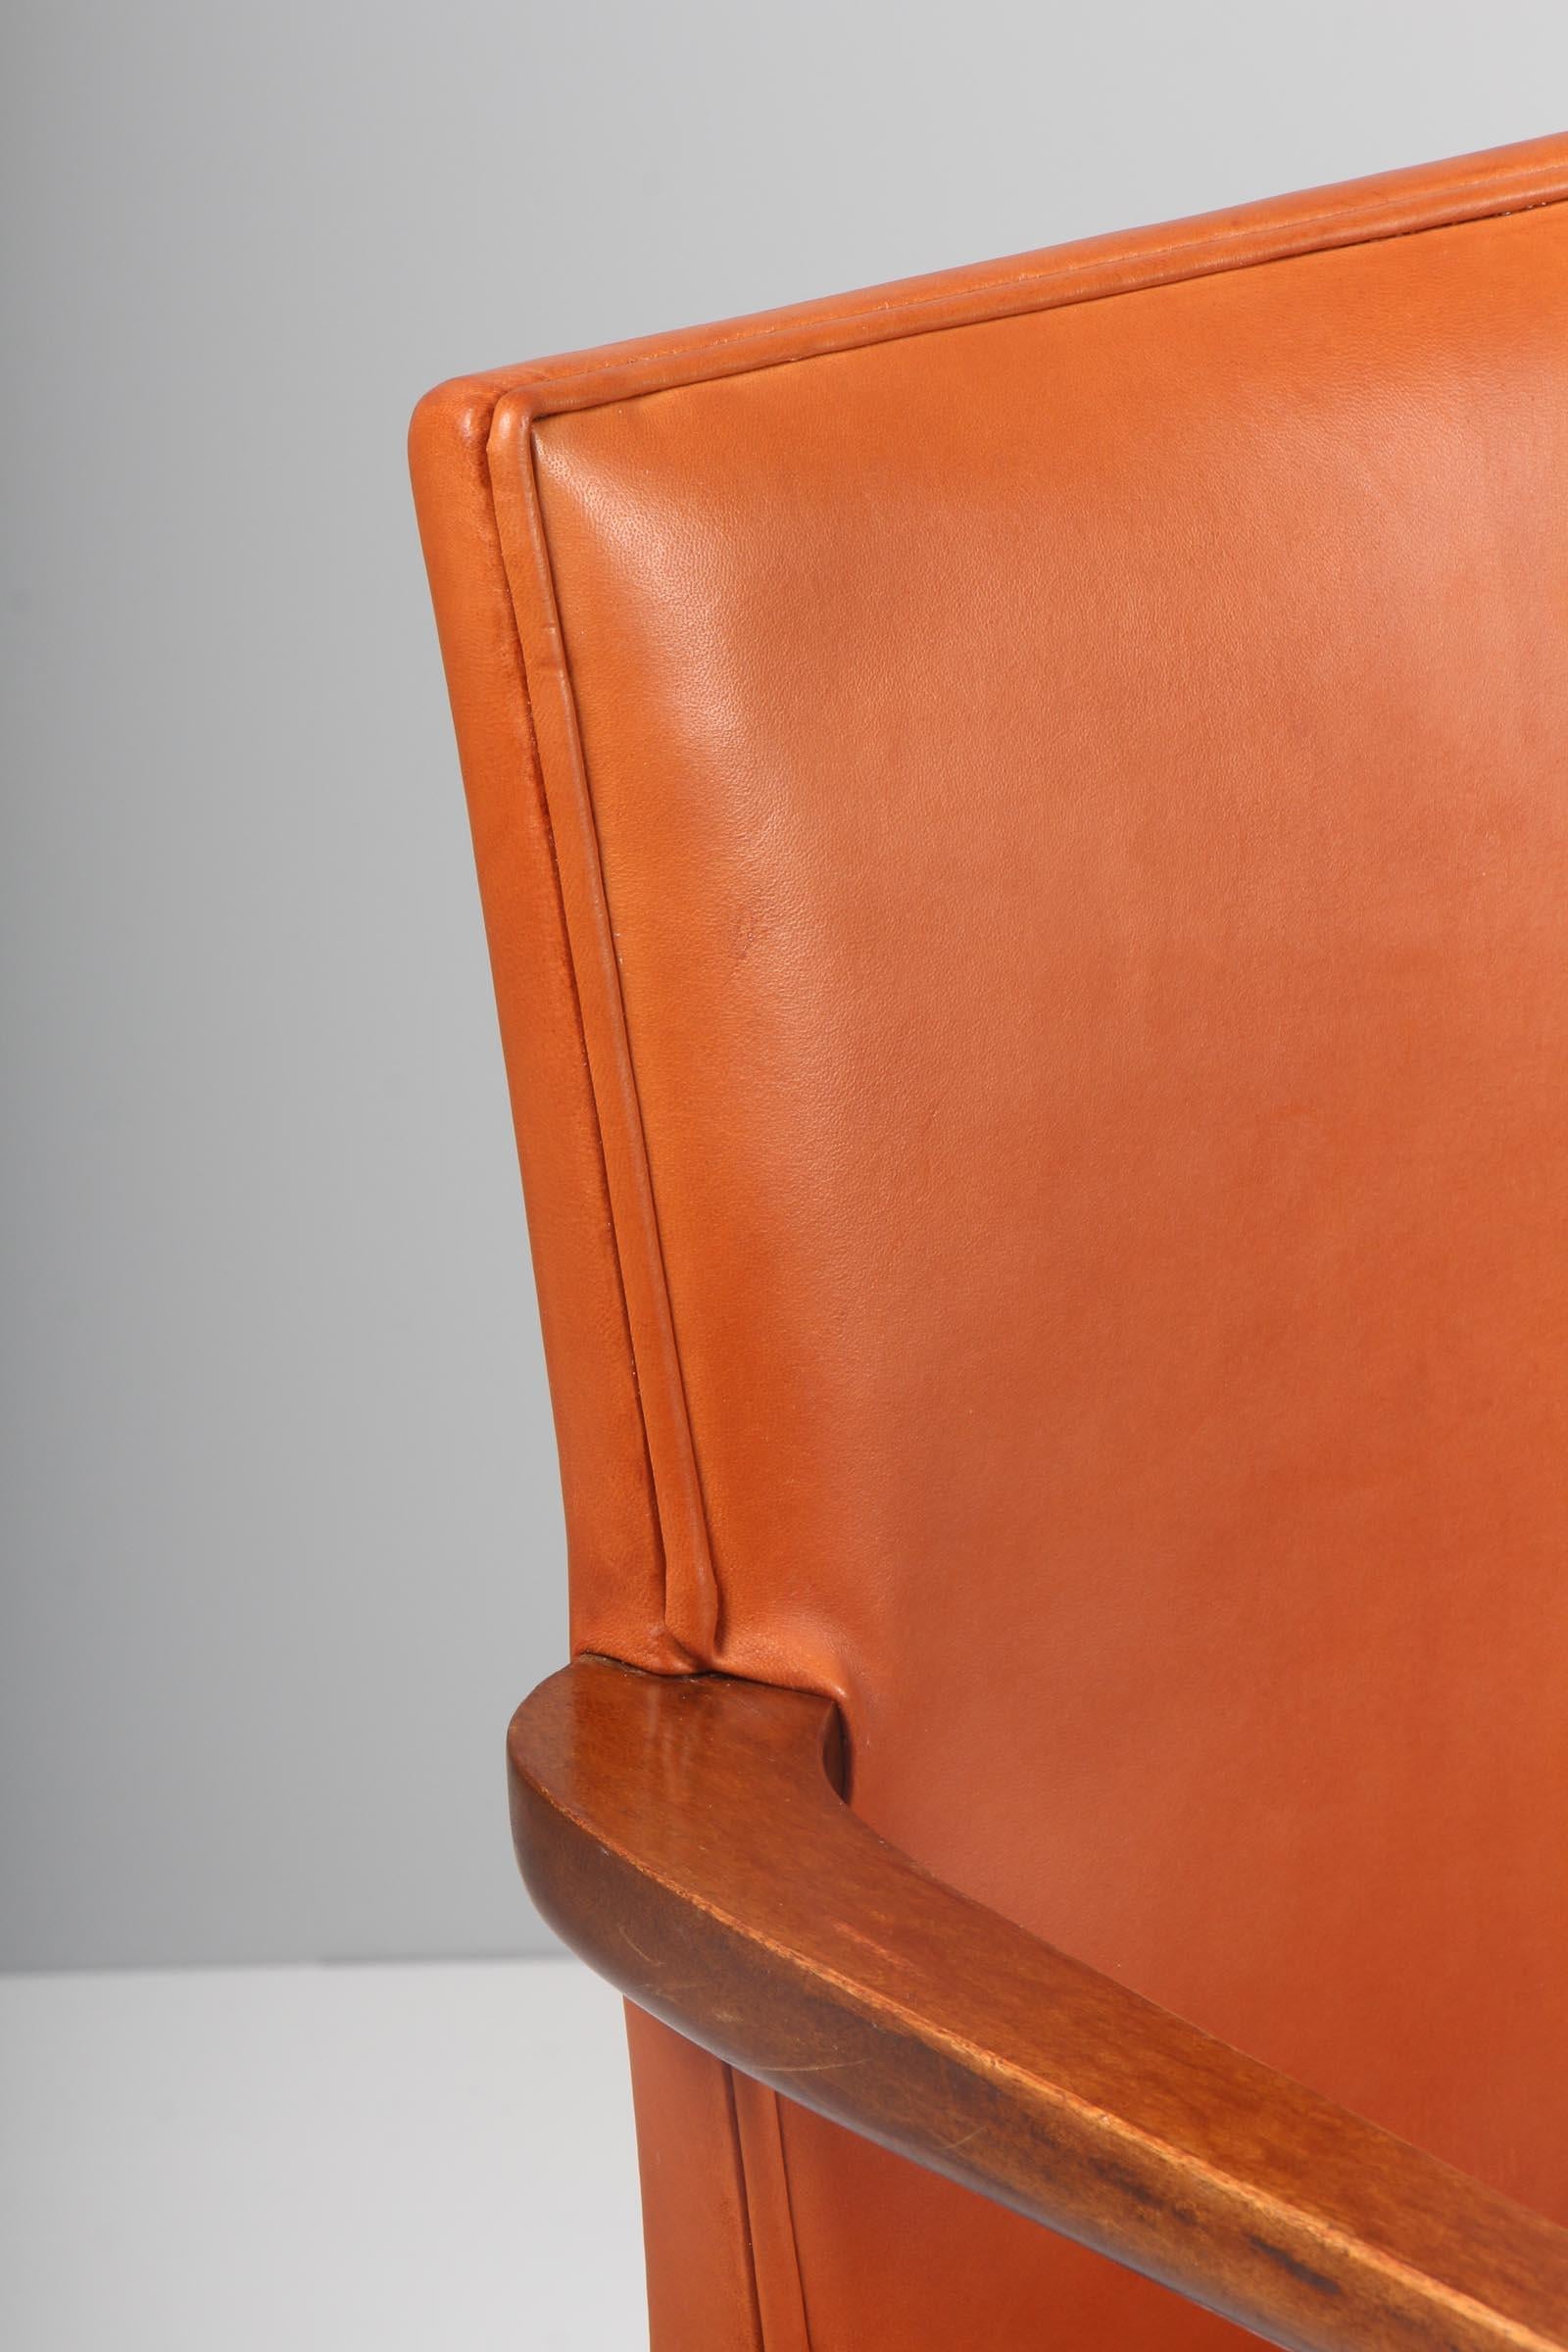 Scandinavian Modern Red Chair by Kaare Klint for Rud Rasmussen, Mahogany and Goat Leather